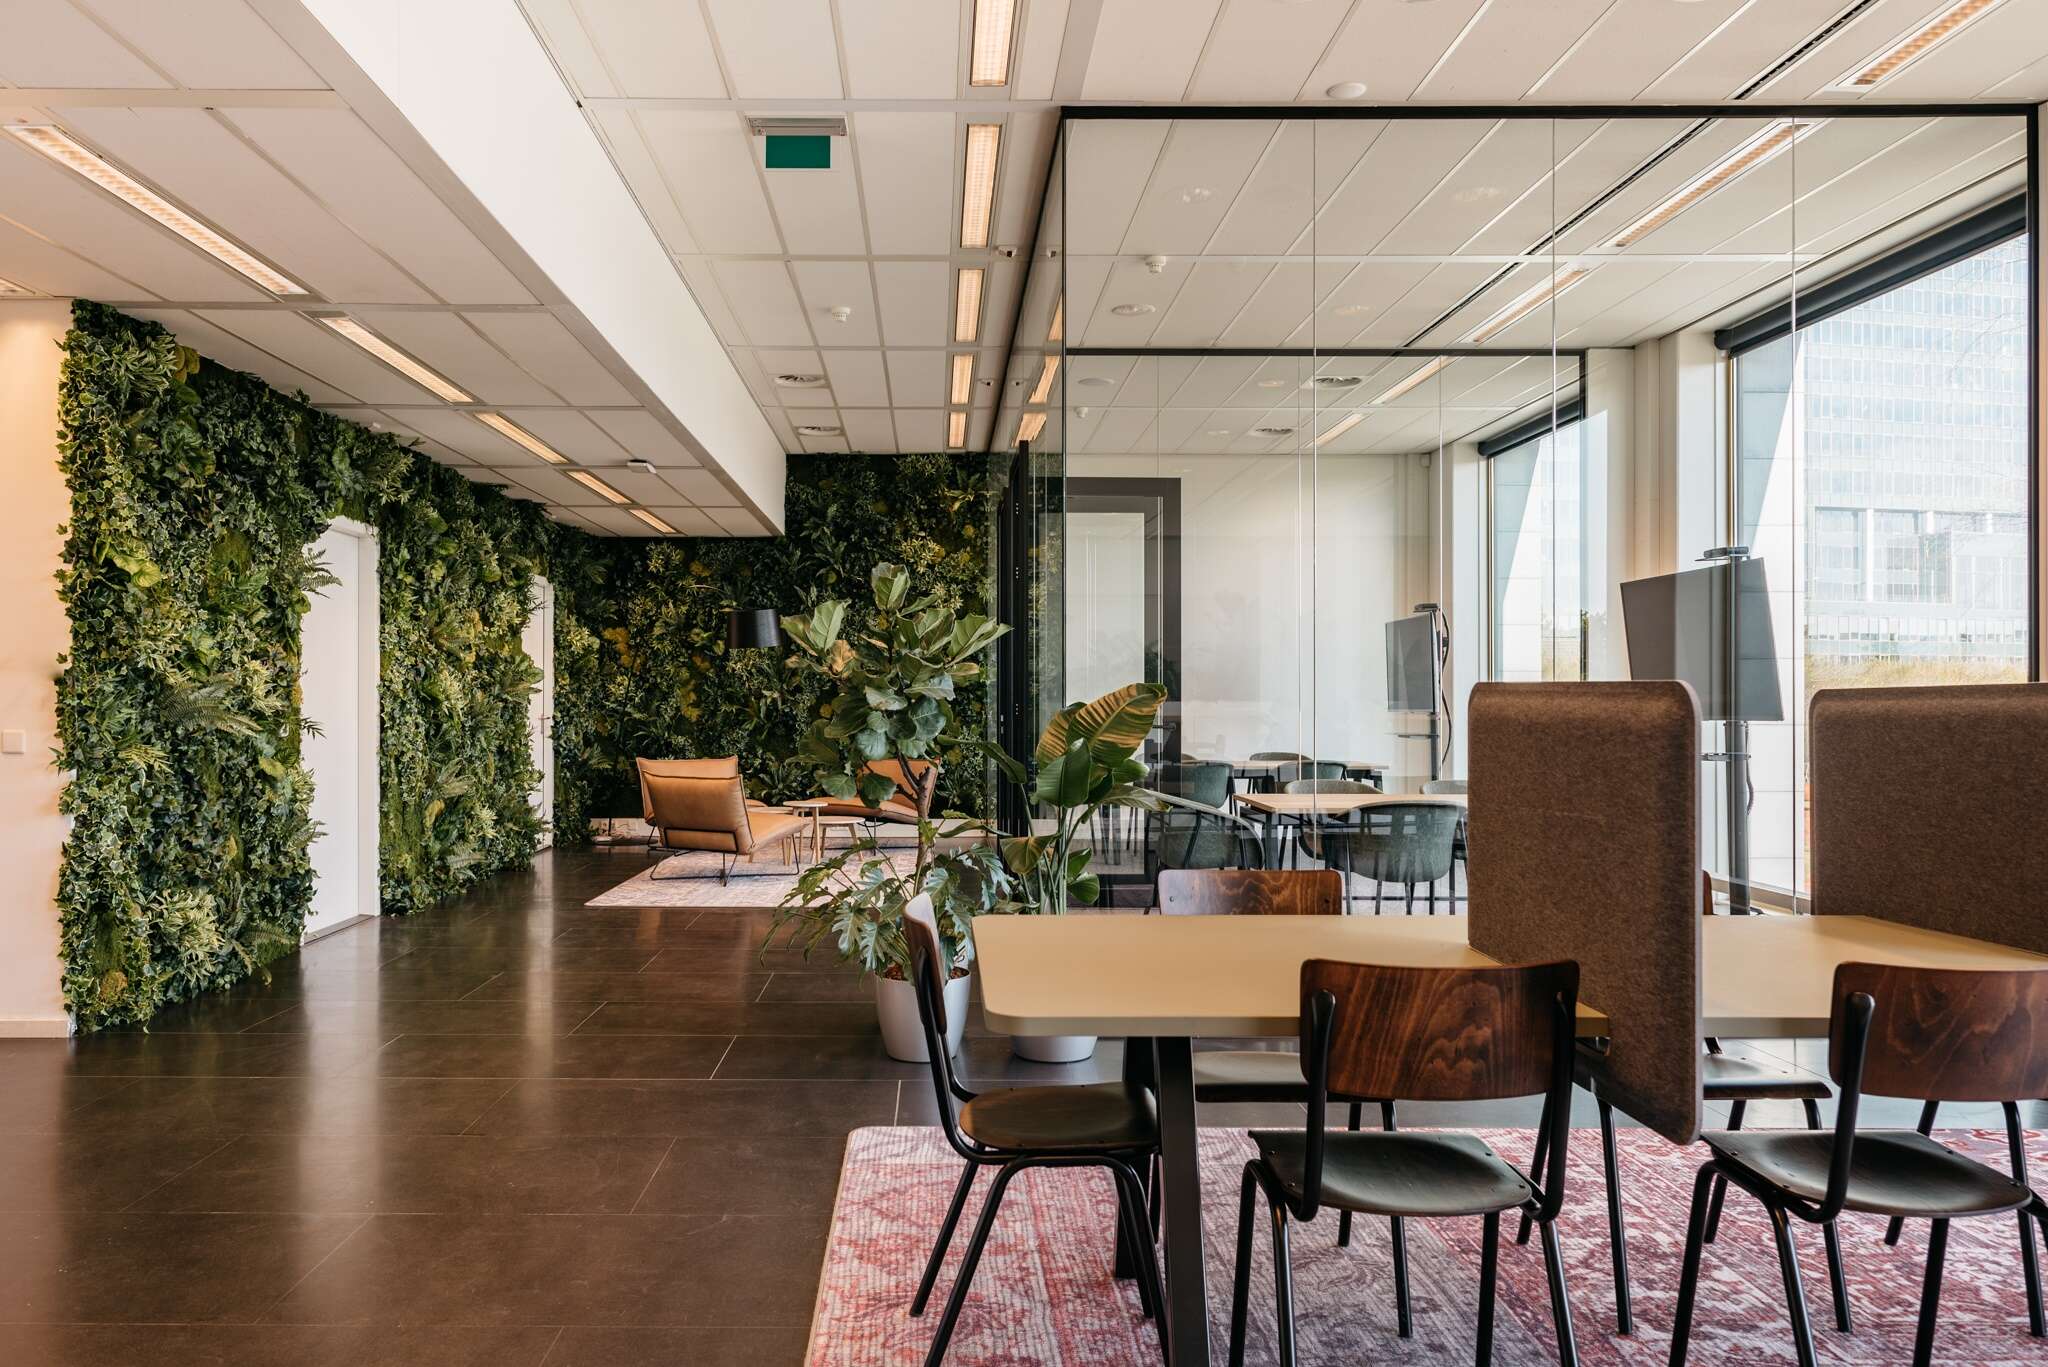 Friendly and accessible reception area with meeting and co-working facilities in the Trinity building in Rotterdam, The Netherlands